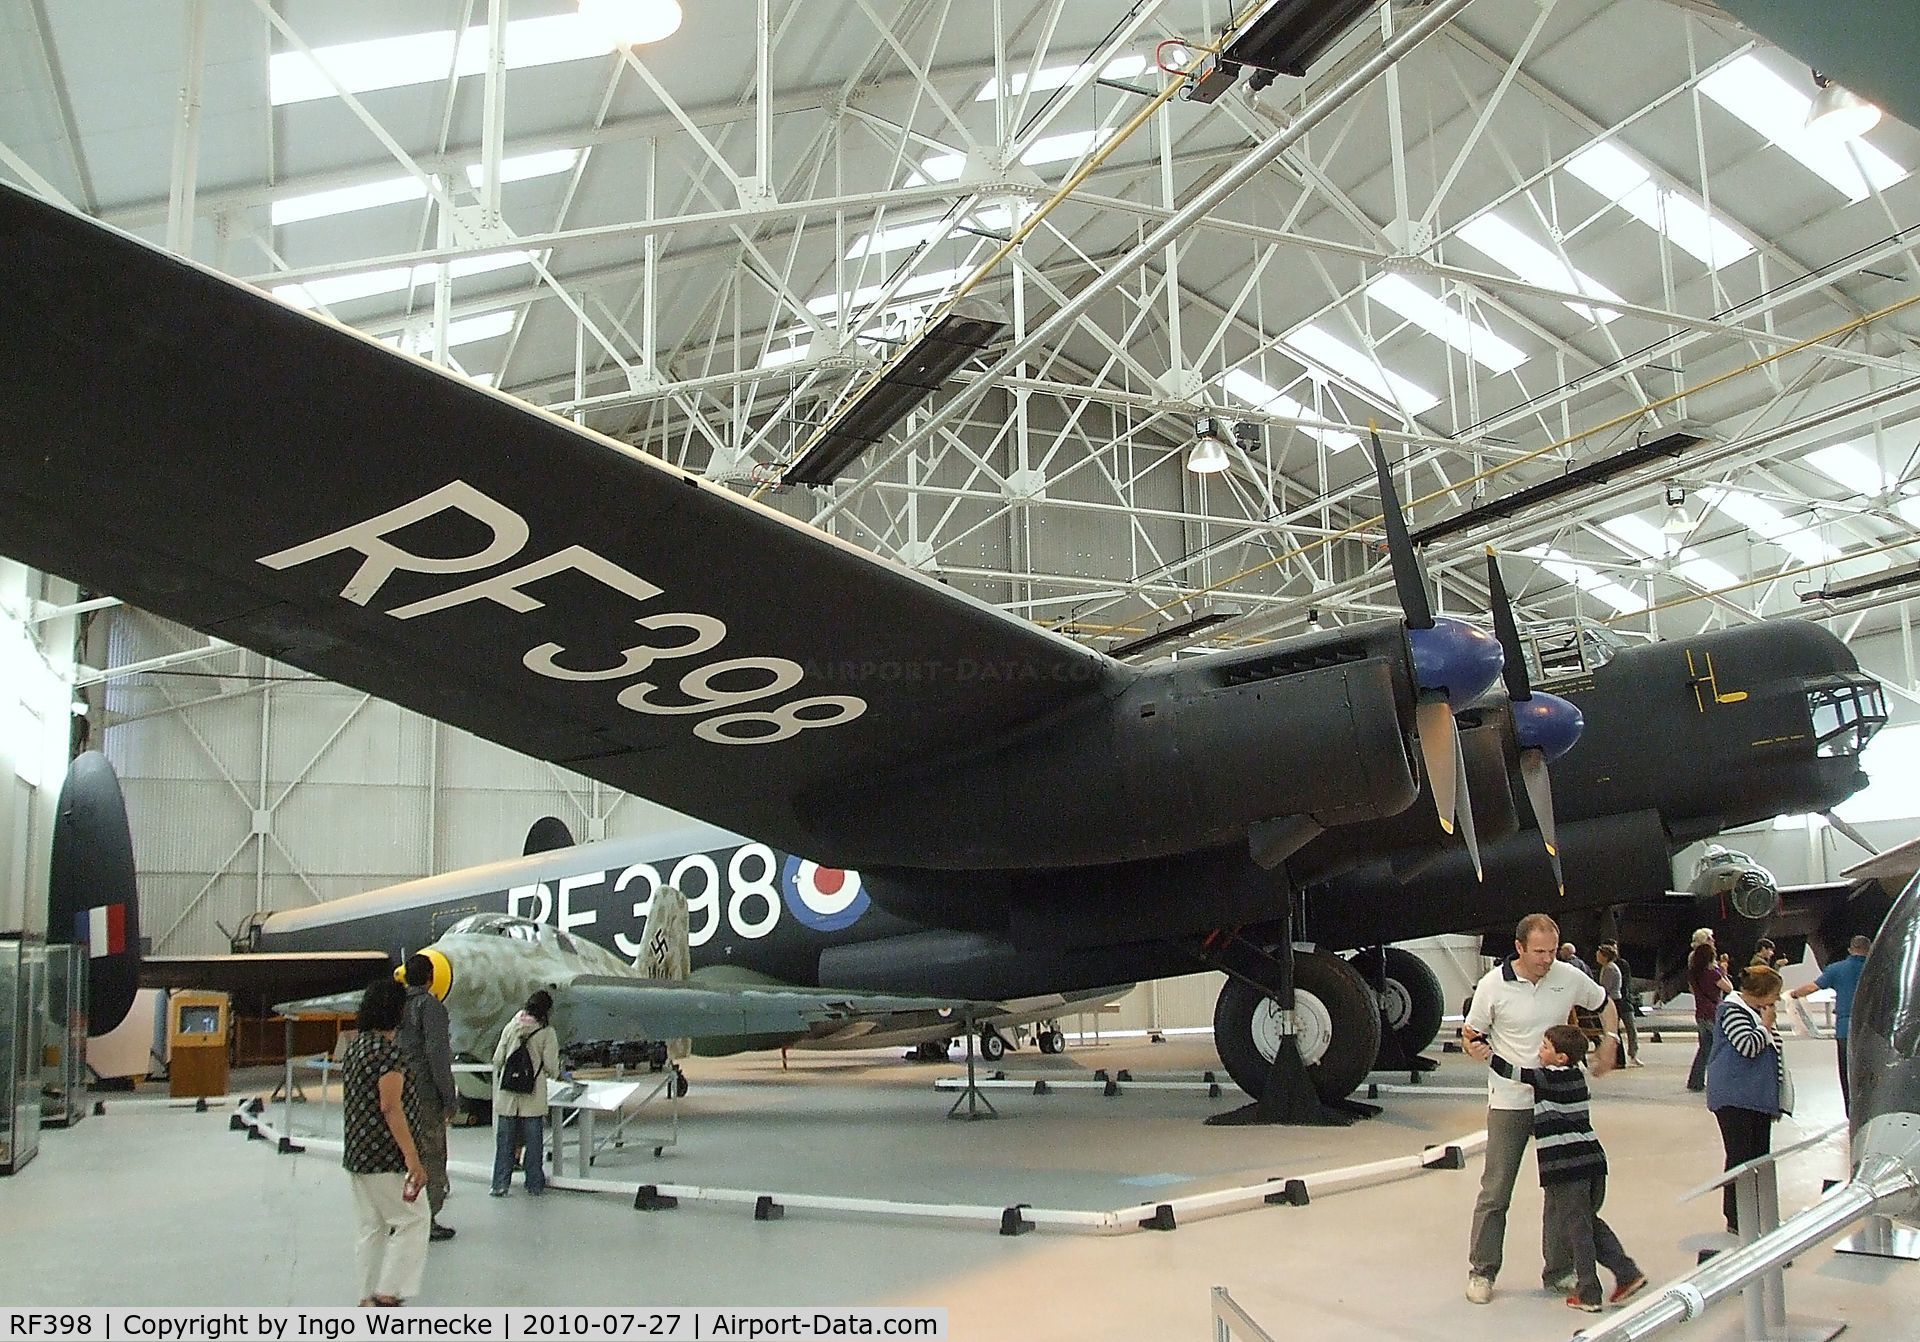 RF398, 1945 Avro 694 Lincoln B.2 C/N Not found RF398, Avro Lincoln B2 at the RAF Museum, Cosford